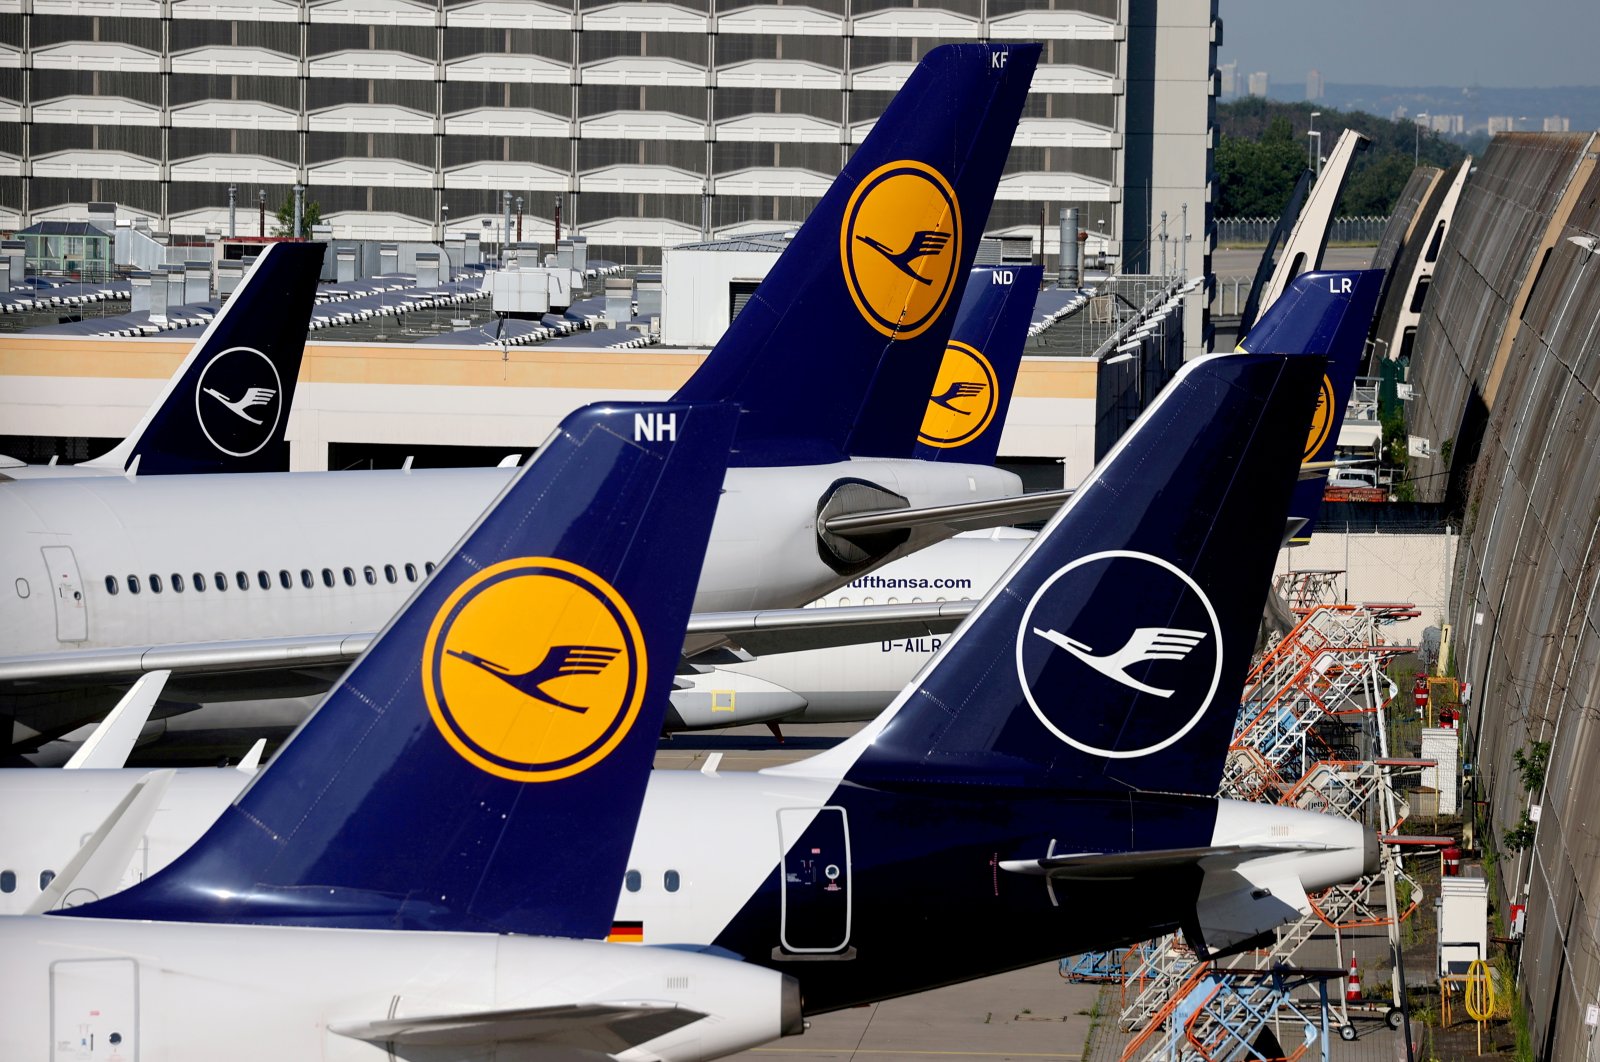 Lufthansa planes are seen parked on the tarmac of Frankfurt Airport, Germany, June 25, 2020. (Reuters Photo)